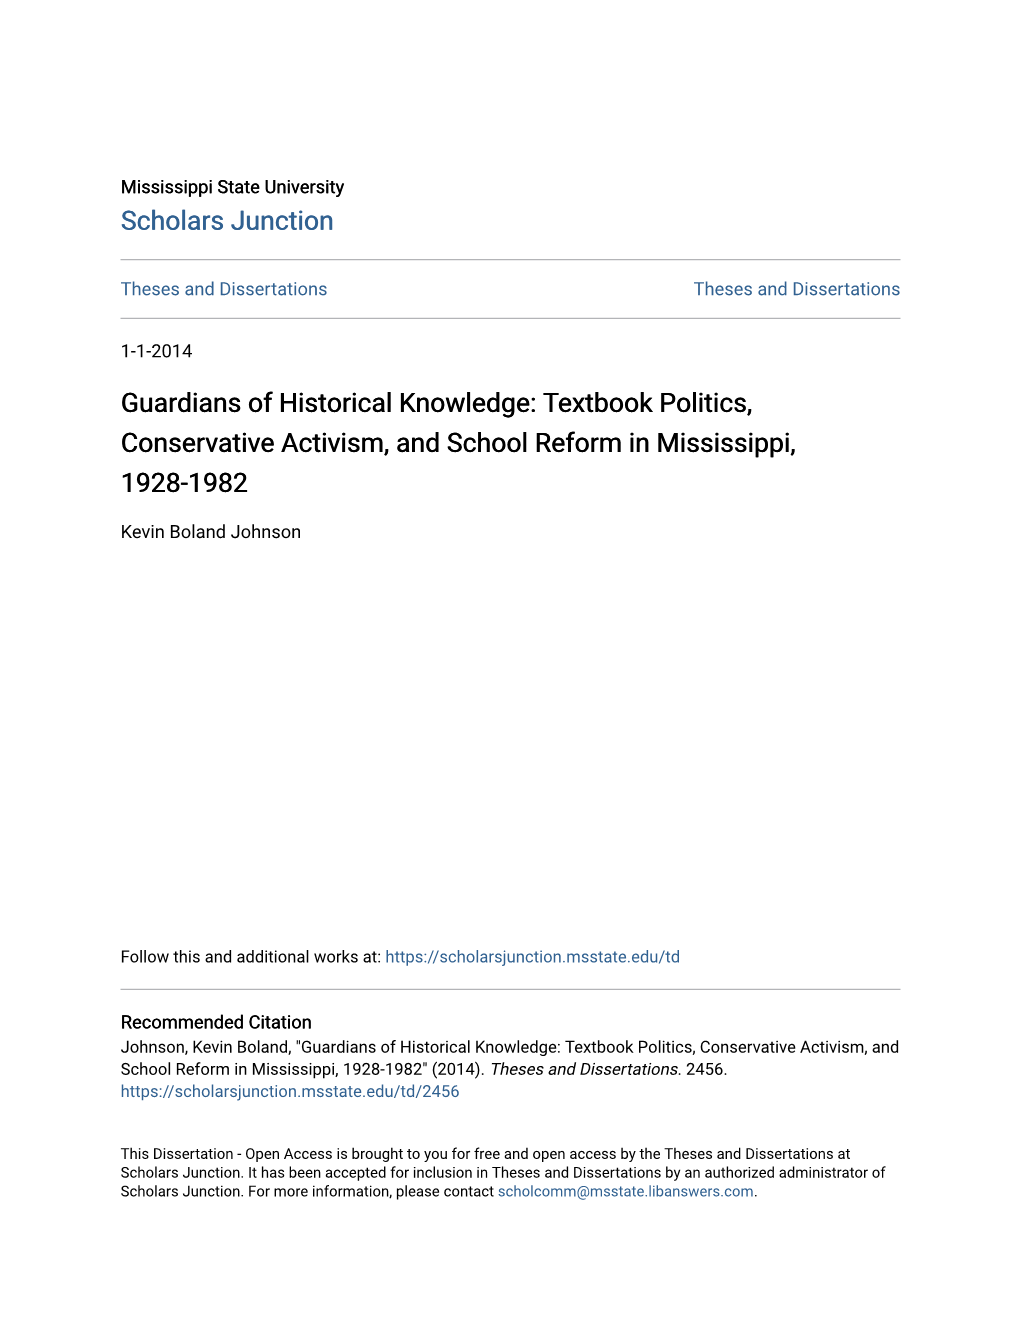 Guardians of Historical Knowledge: Textbook Politics, Conservative Activism, and School Reform in Mississippi, 1928-1982